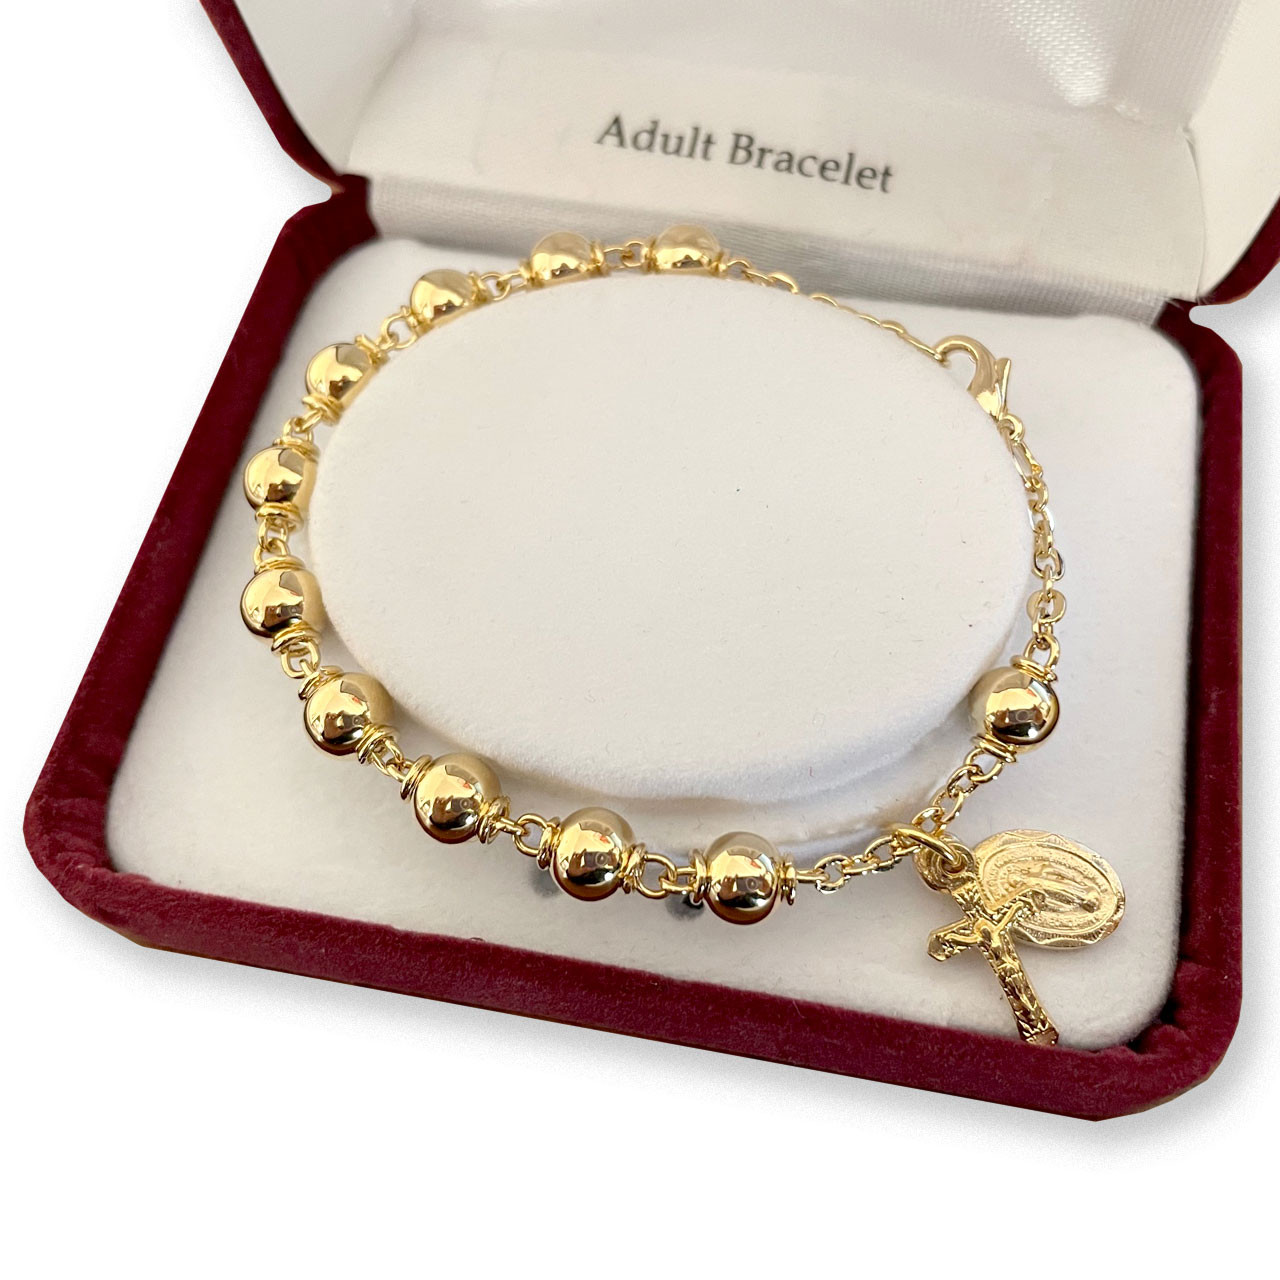 Gold Plated Rosary Bracelet shown in the deluxe gift box